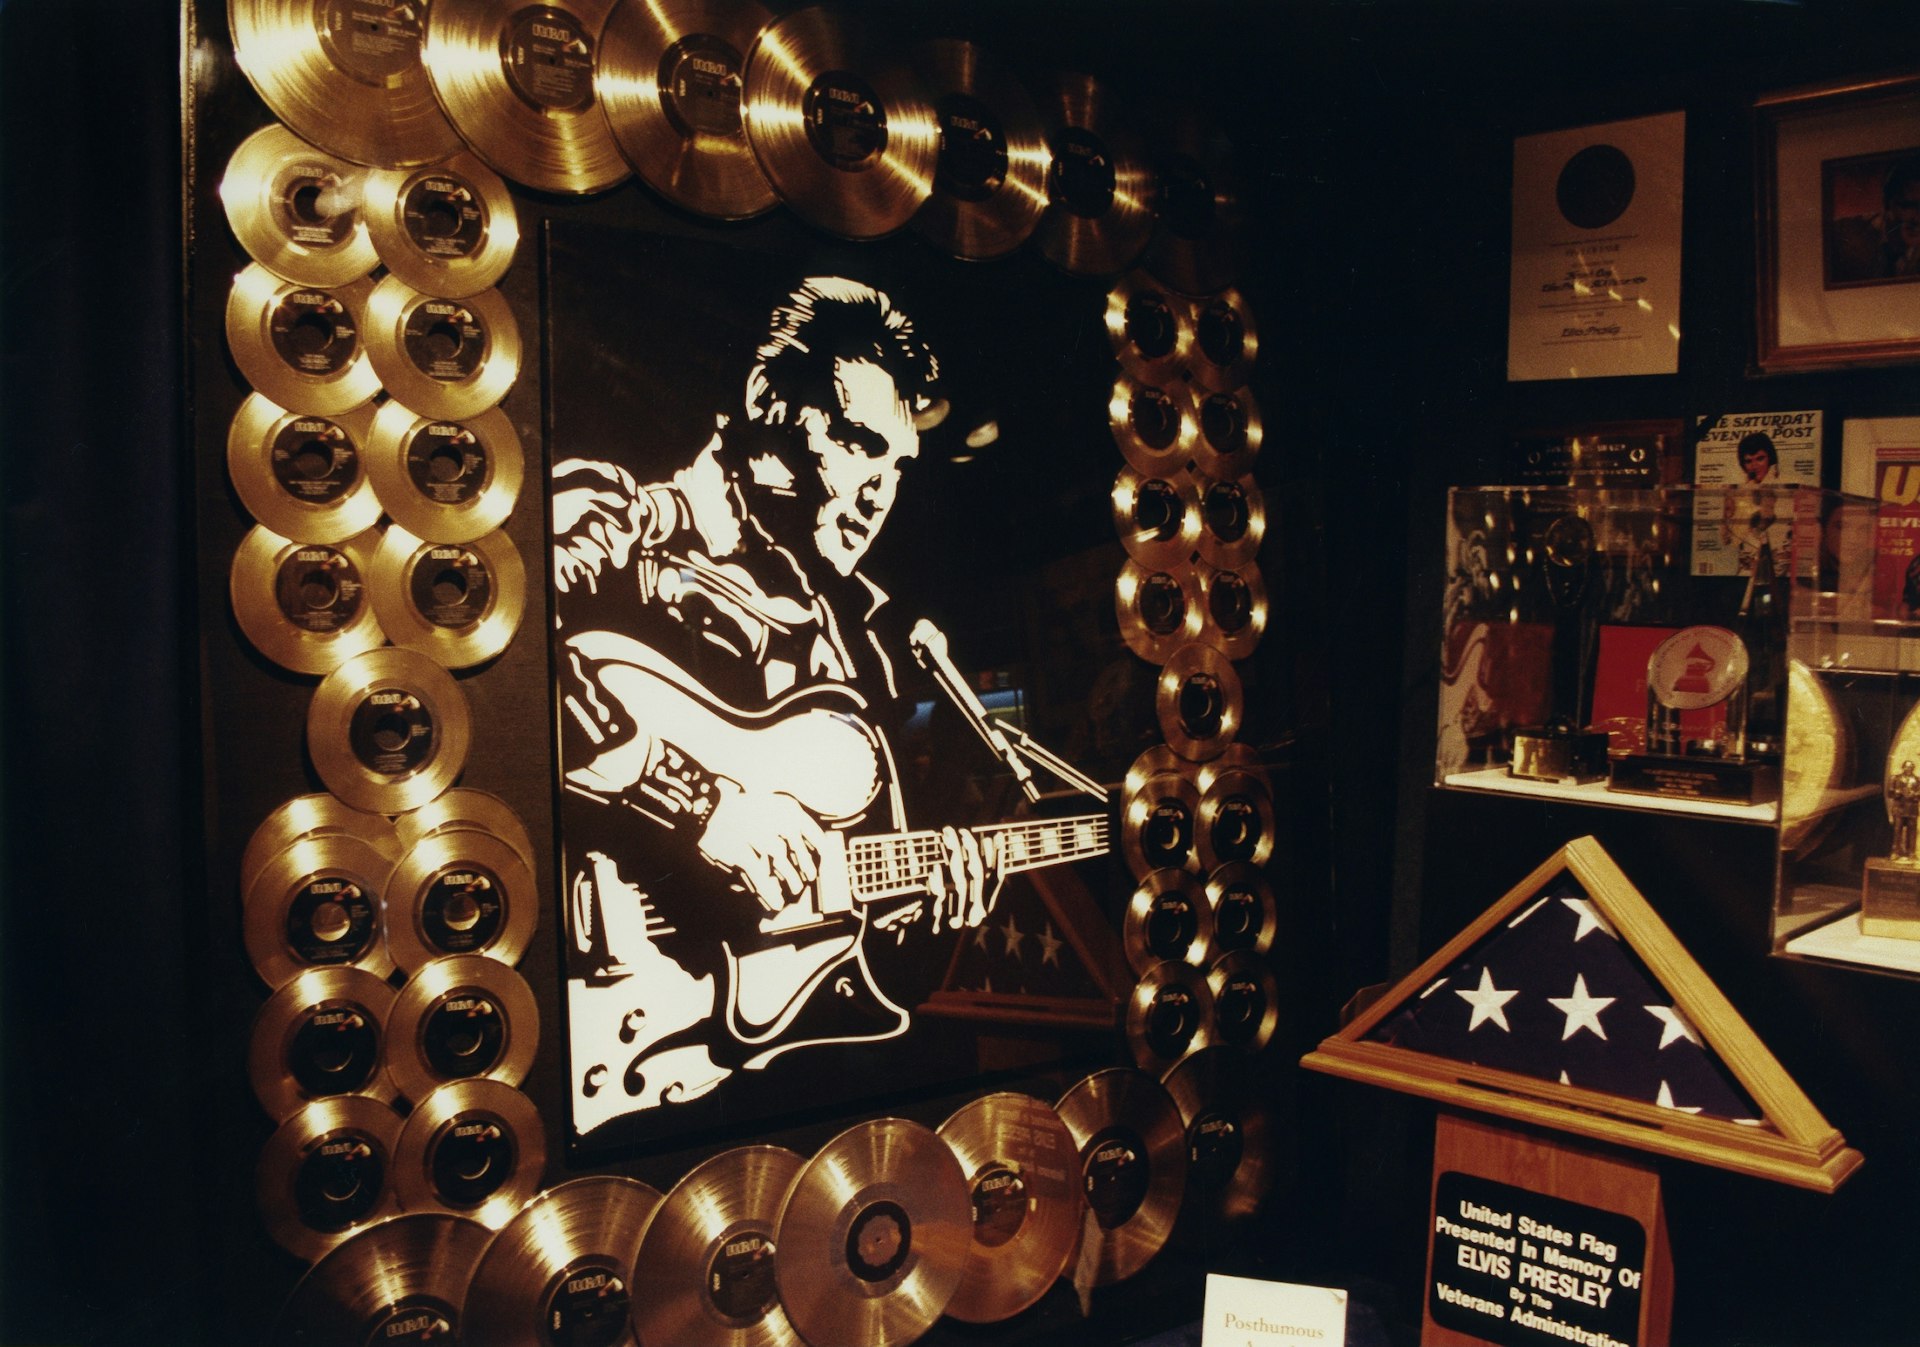 Gold records serve a frame for a black-and-white portrait of Elvis Presley, plus a folded American flag and other memorabilia at Graceland